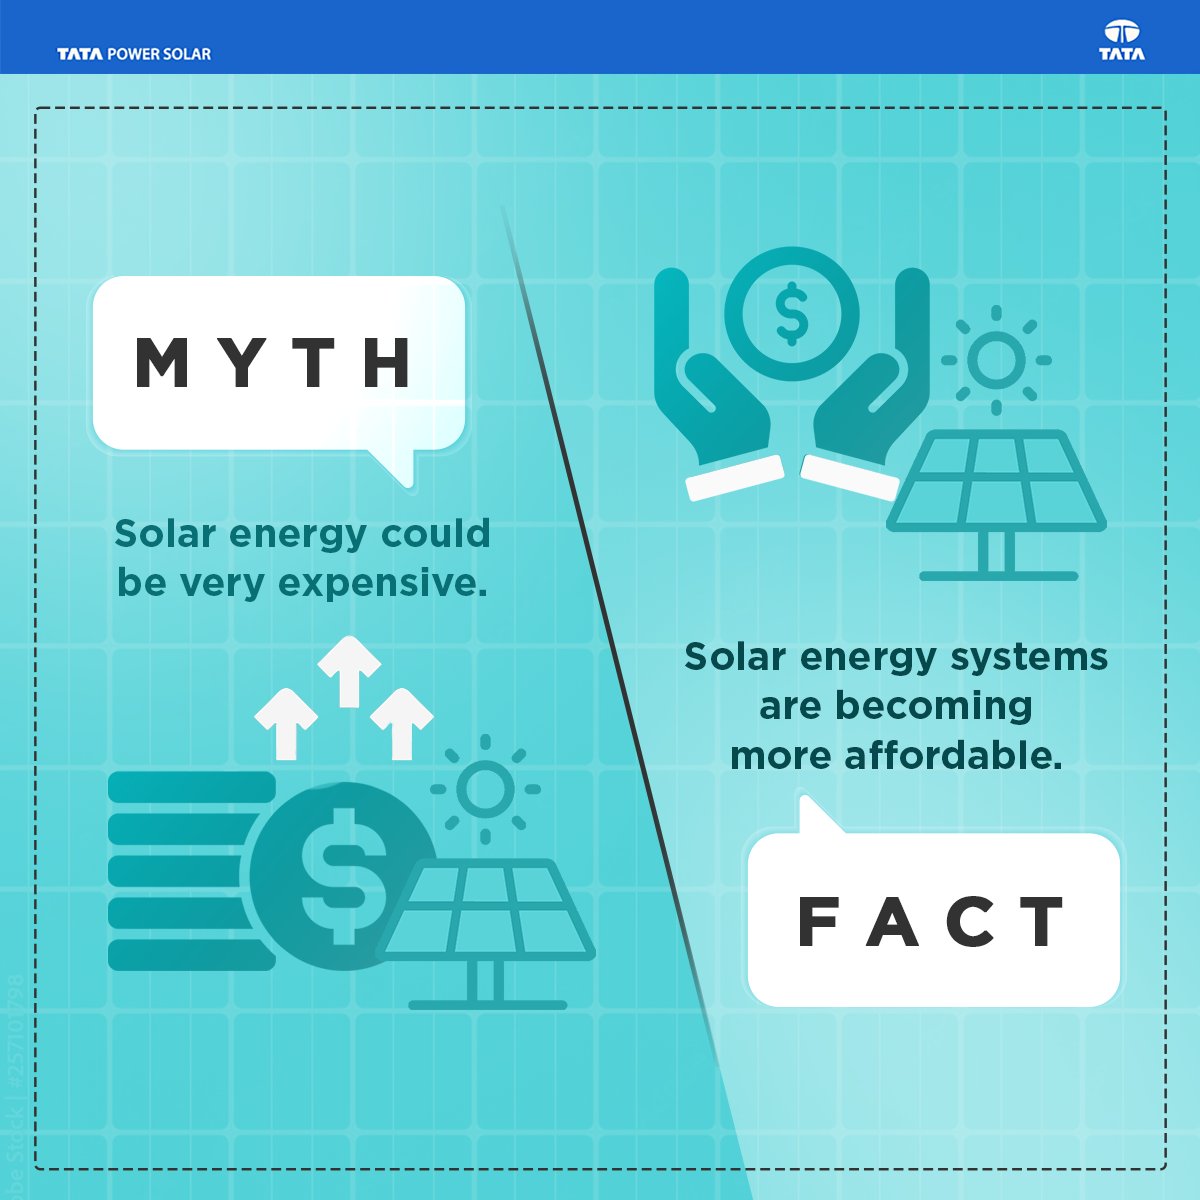 Recent statistics show a significant increase in investments in solar systems due to their growing affordability and economic viability. Bust the myths and switch to solar with us!

#TataPowerSolar #solarpanels #bustingmyth #mythvsfact